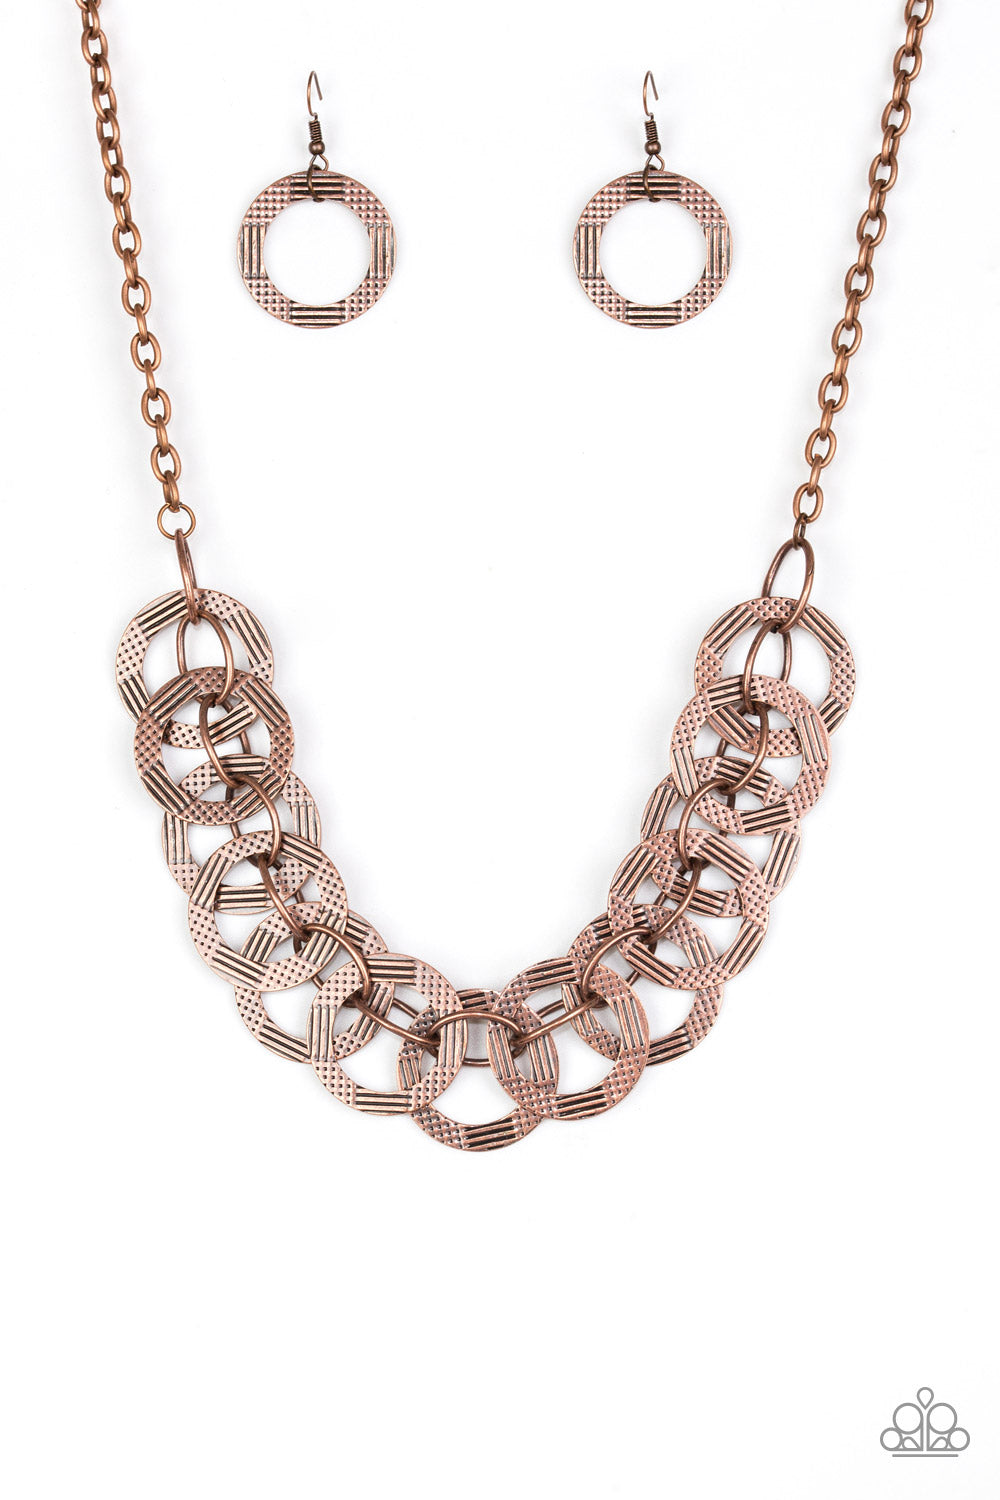 The Main Contender - Copper Necklace - TheMasterCollection